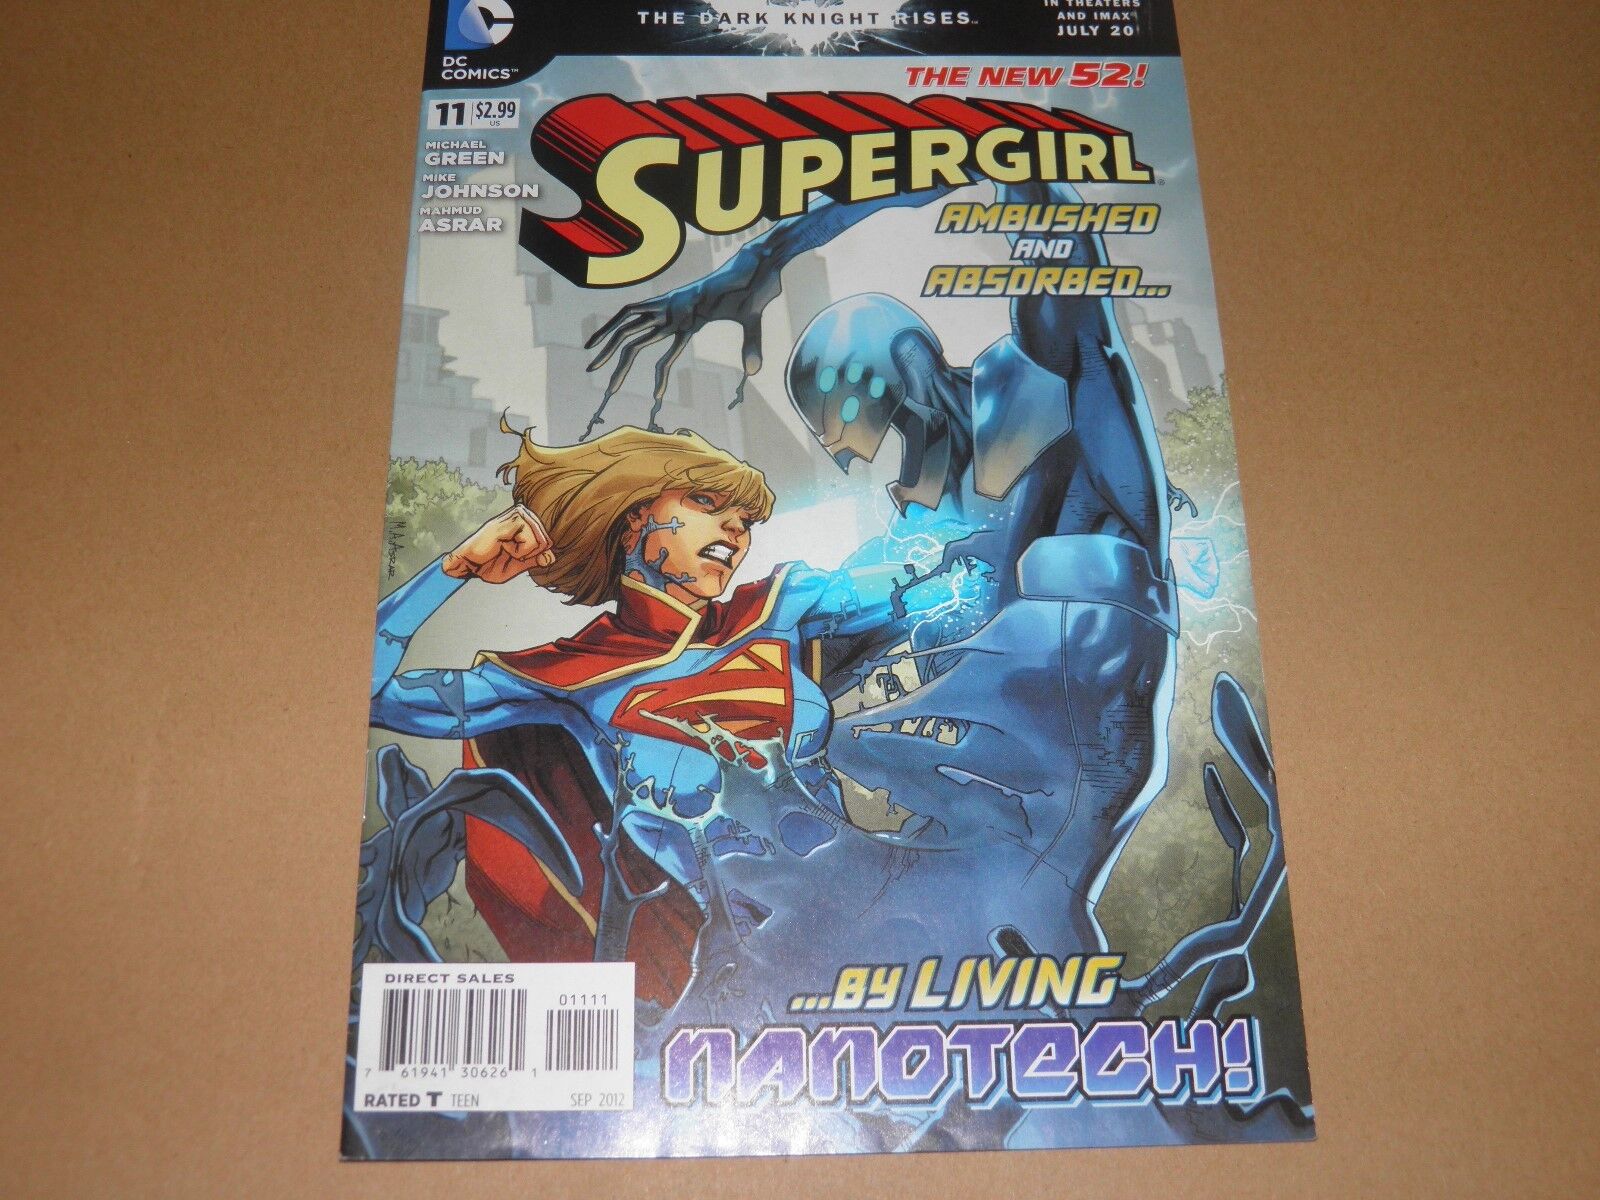 THE NEW 52 DC COMICS: SUPERGIRL #11: AMBUSHED AND ABSORB... BY NANOTECH